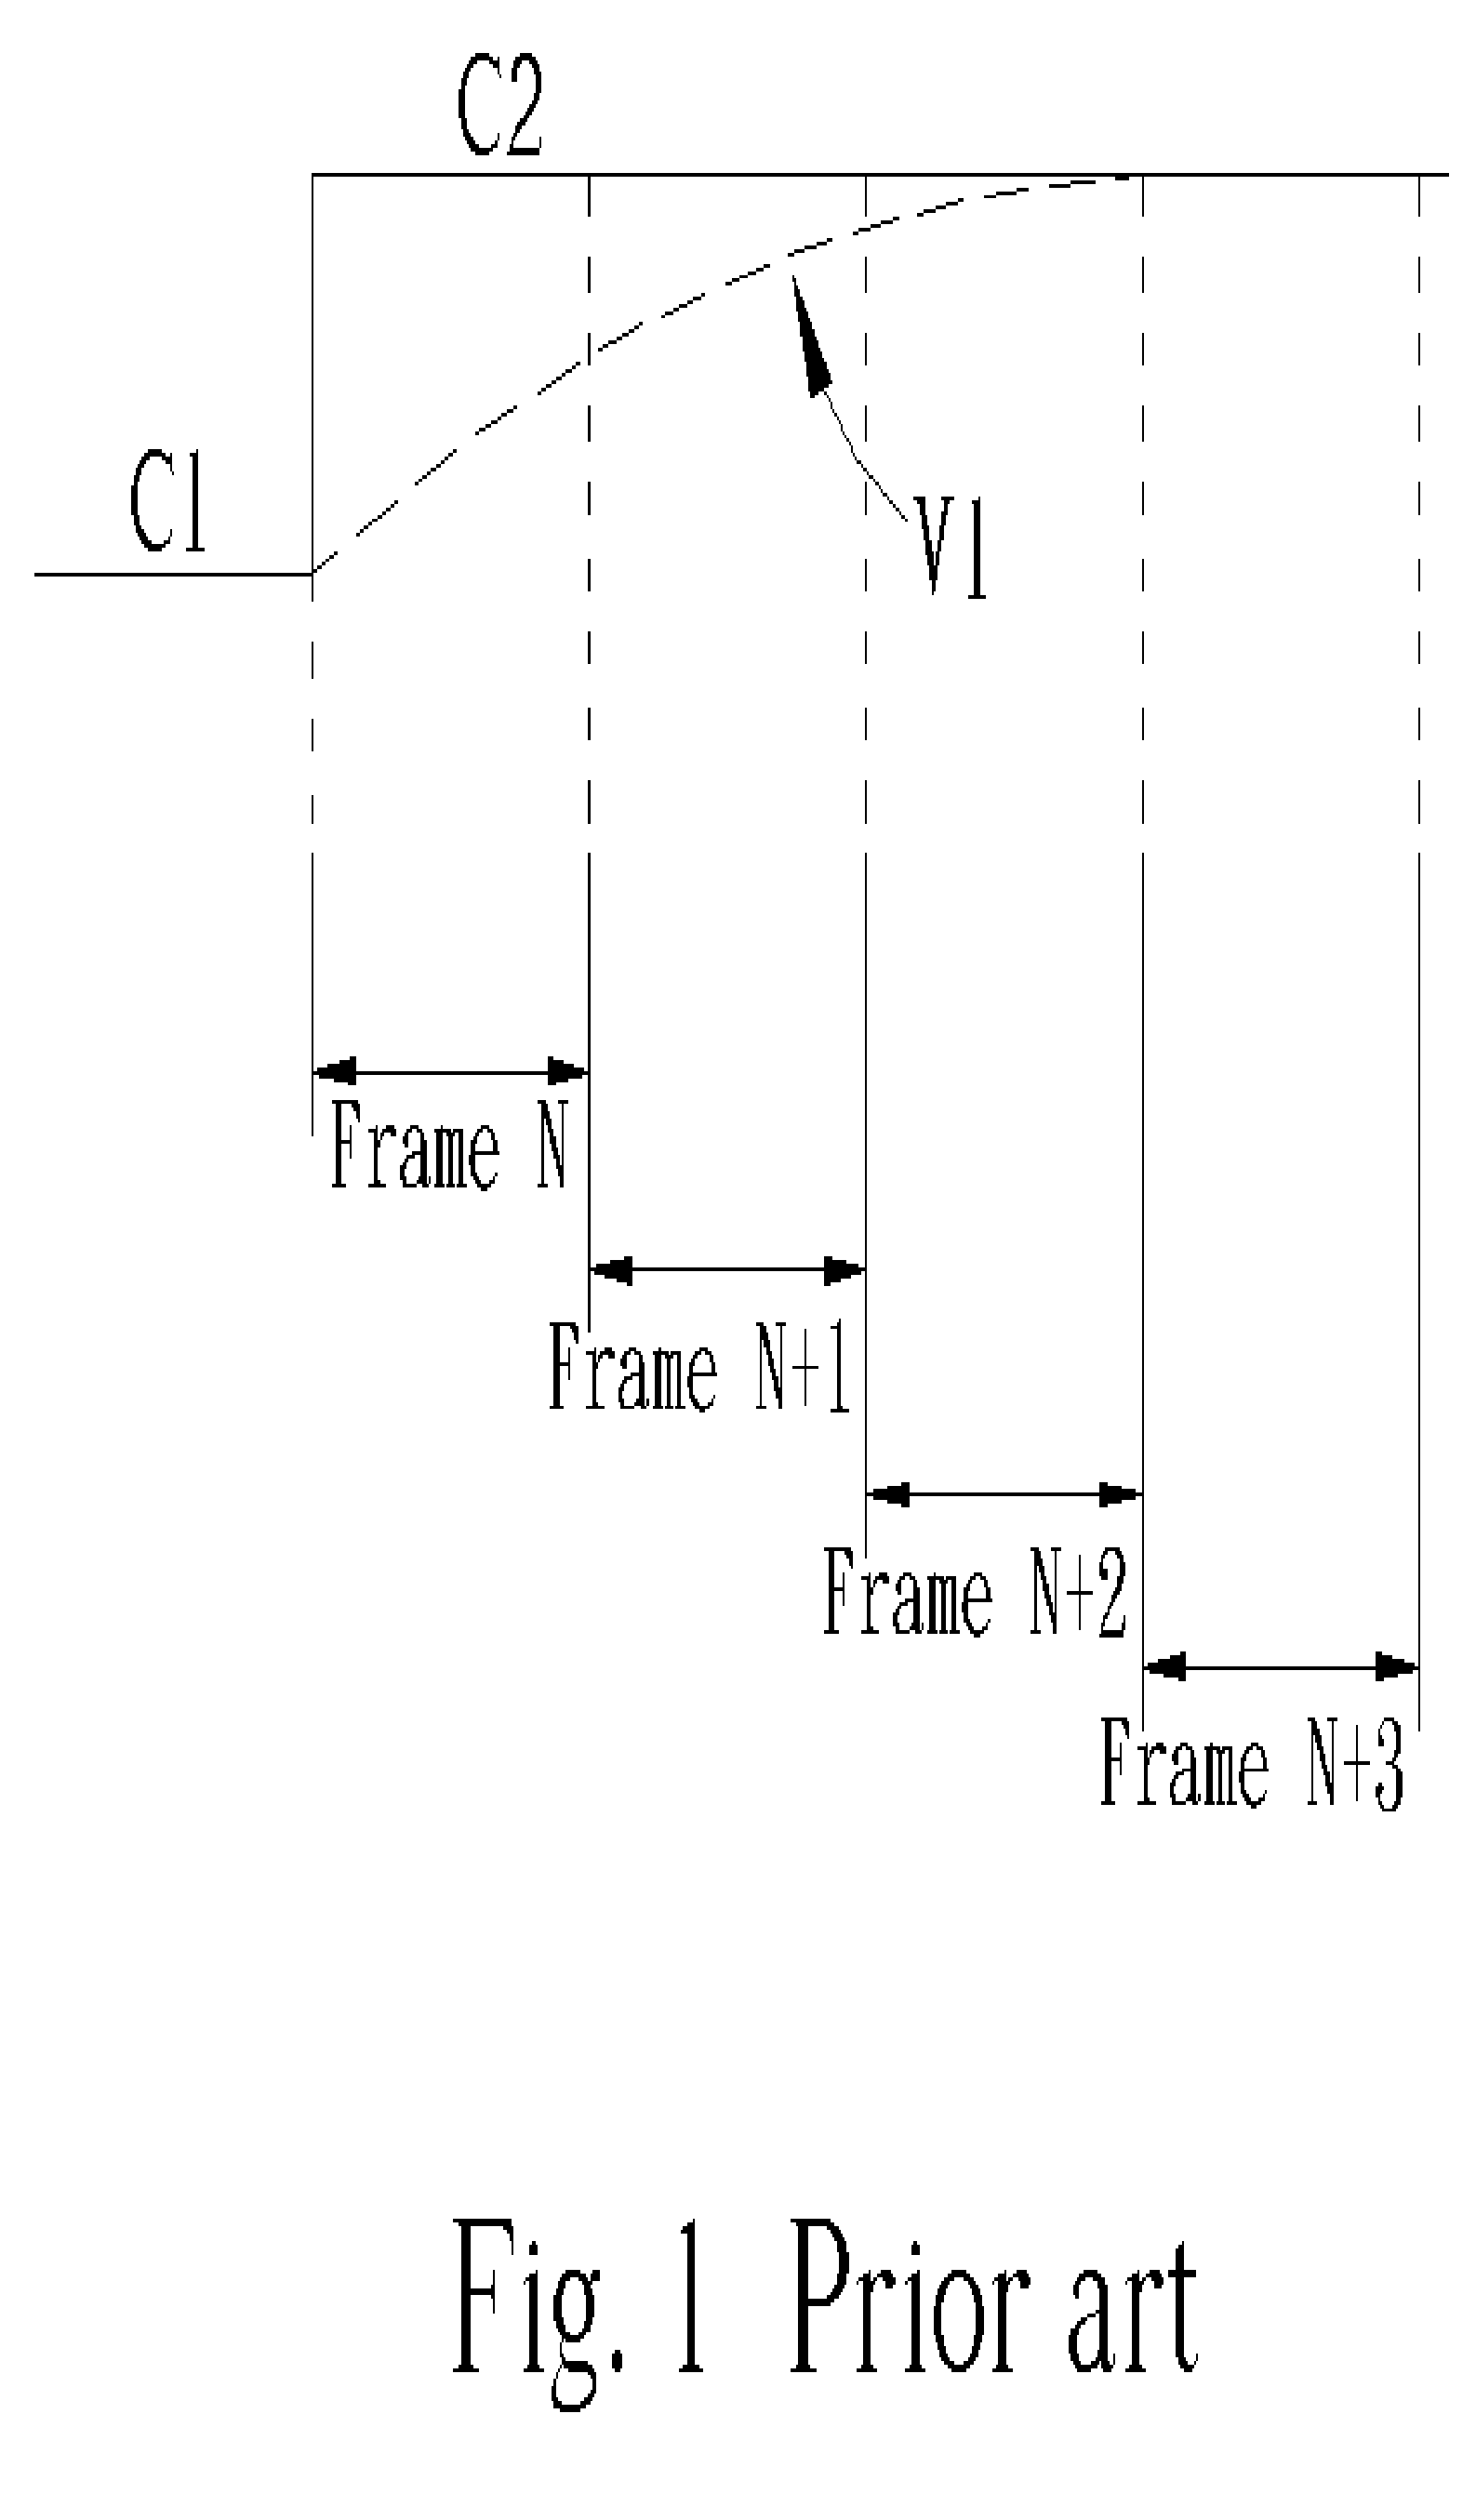 Driving circuit of a liquid crystal display and relating driving method